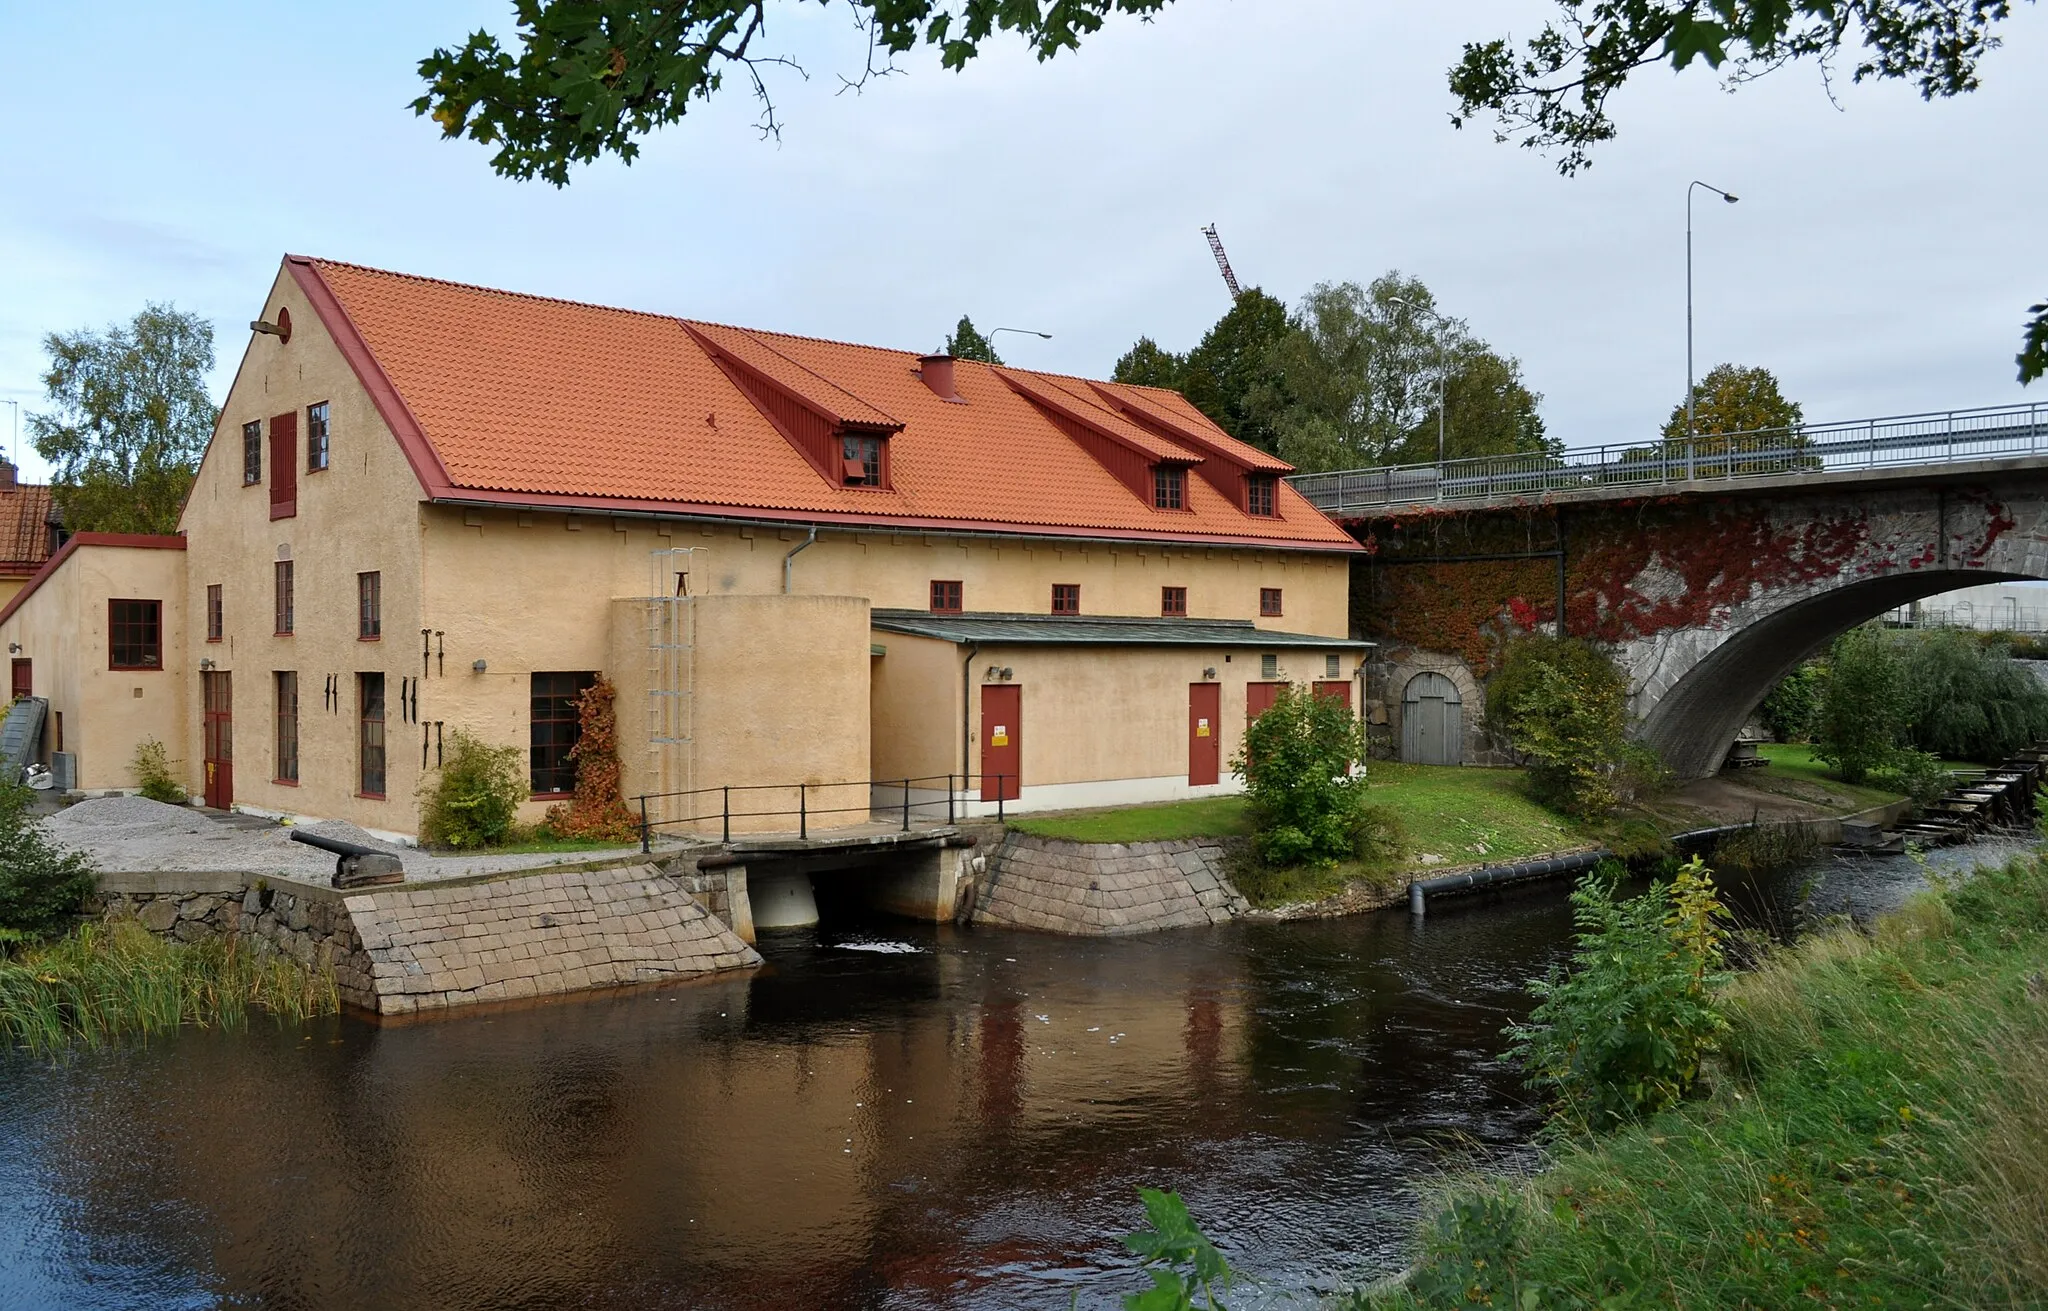 Photo showing: The watermill in Lyckeby, named Kronokvarnen.